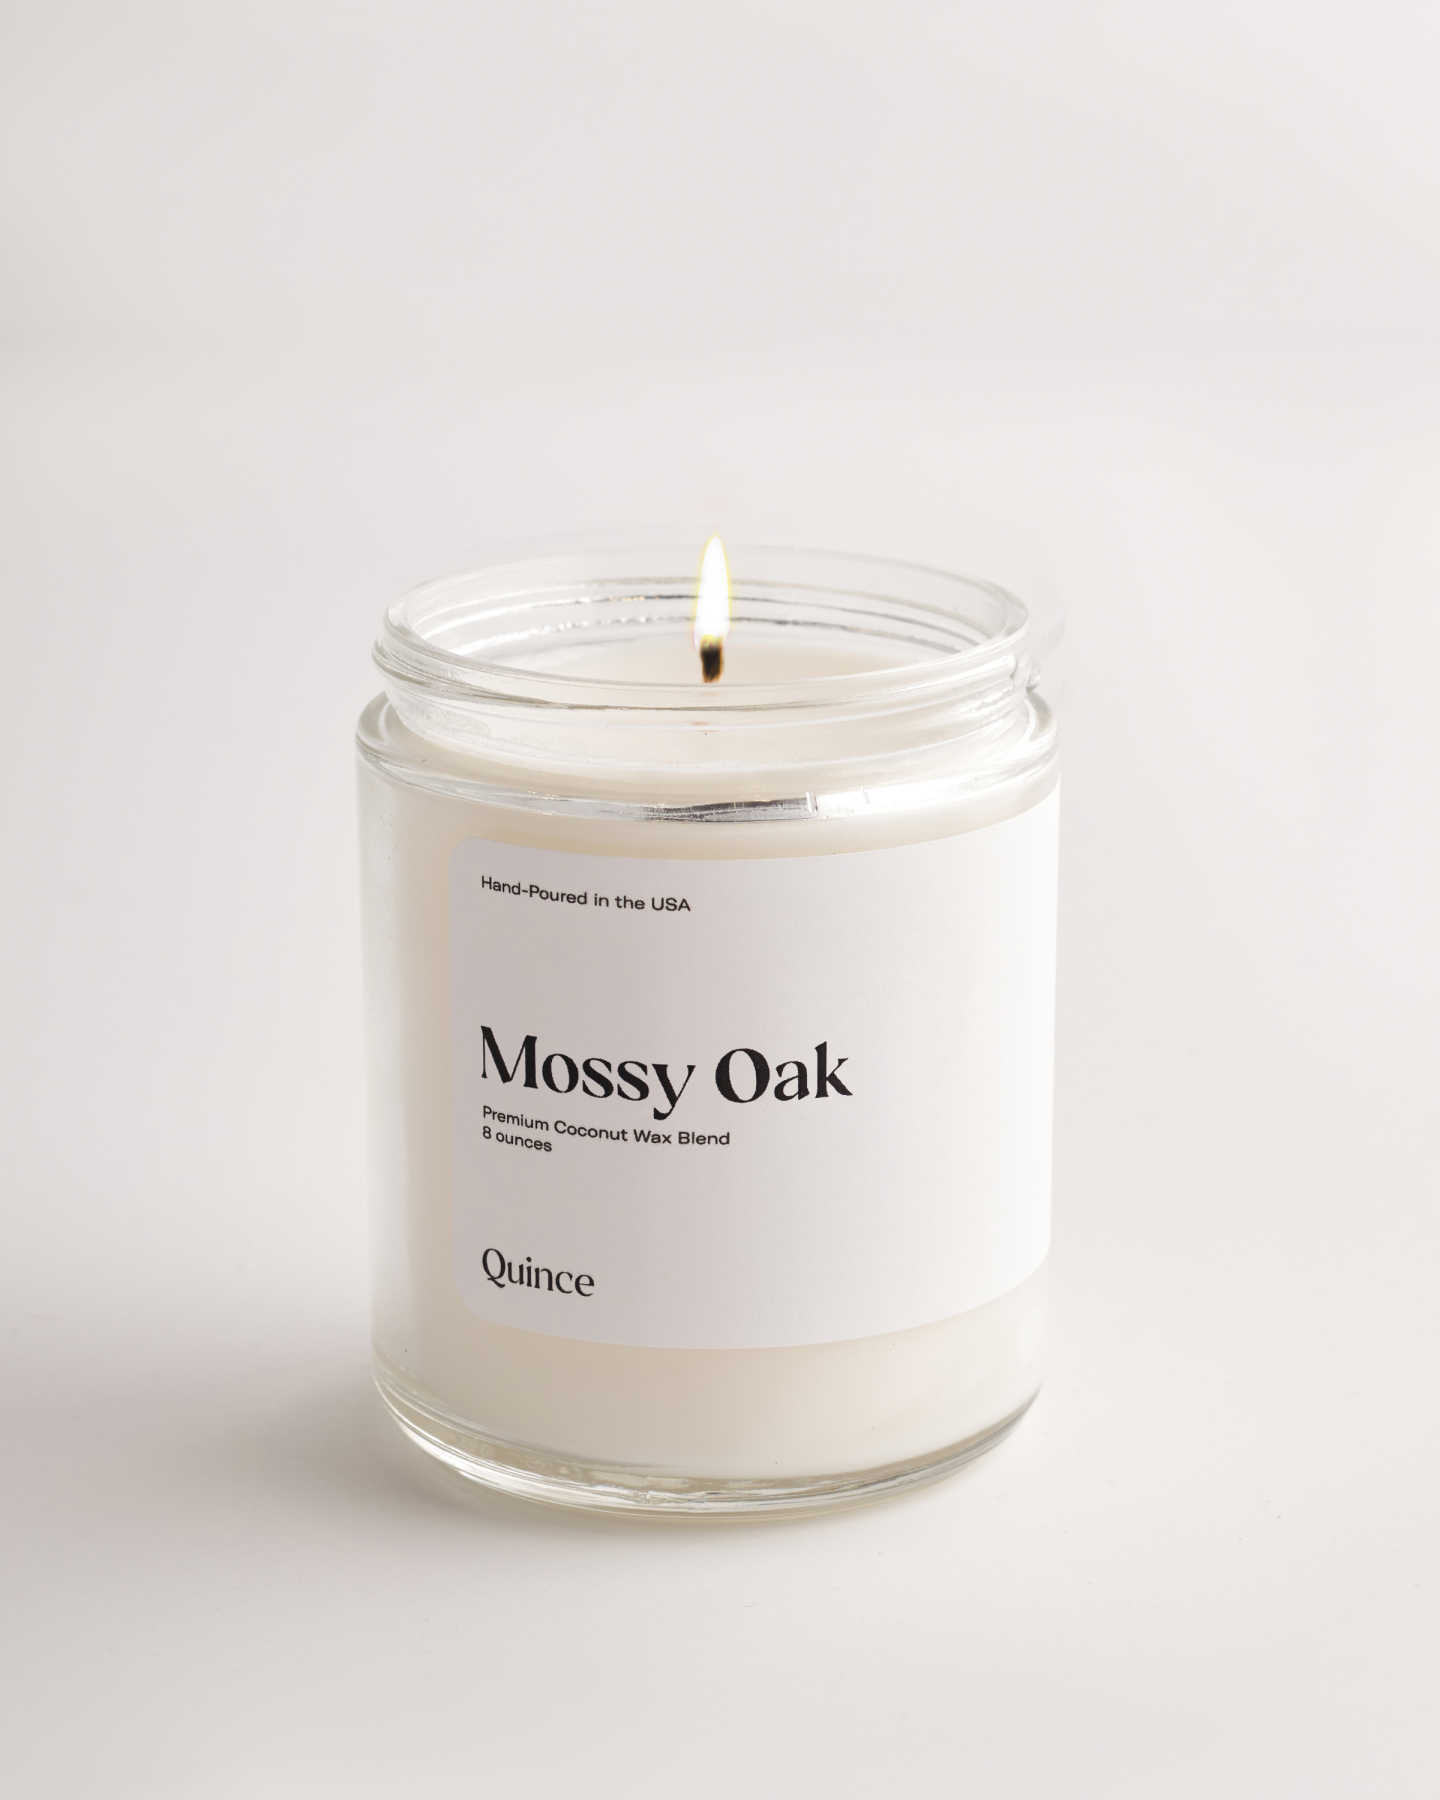 Hand-Poured Coconut Wax Candle - Mossy Oak - 5